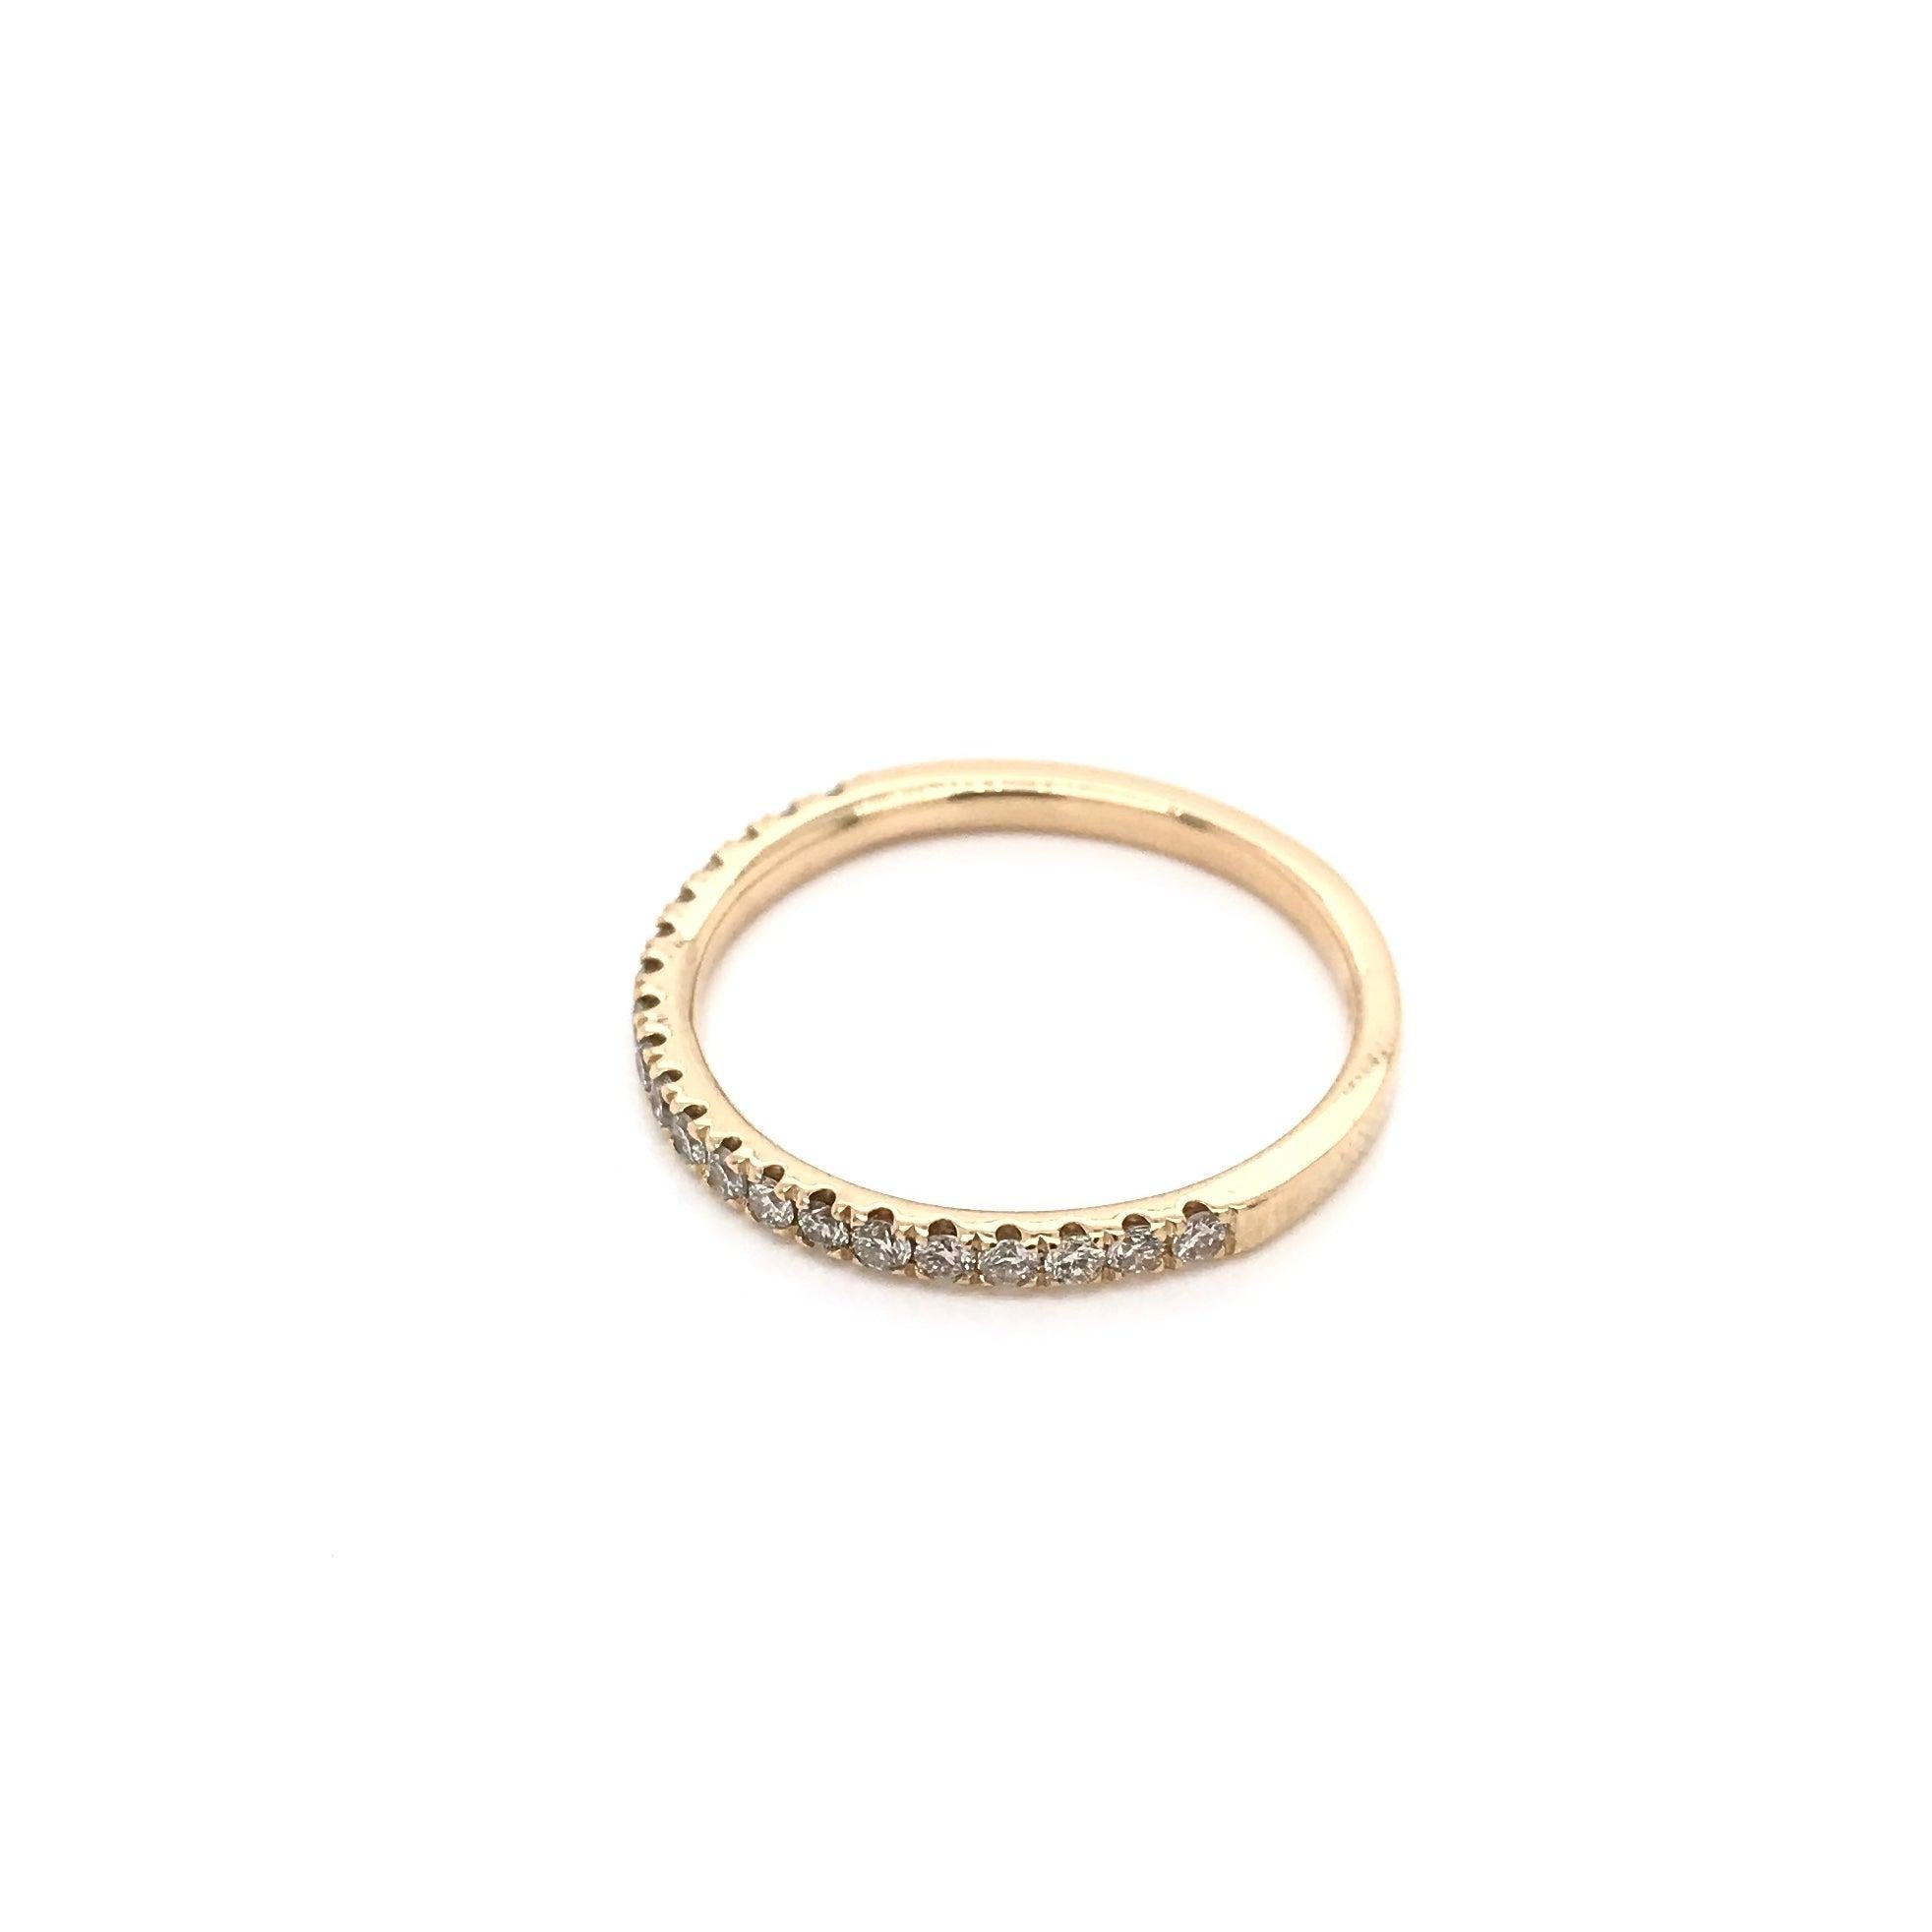 This 14k gold wedding band is a contemporary piece. The band features 20 sparkling white diamonds set along the top half of the shank and has a total combined diamond weight of approximately 0.28 carats. An instant classic, this gorgeous diamond